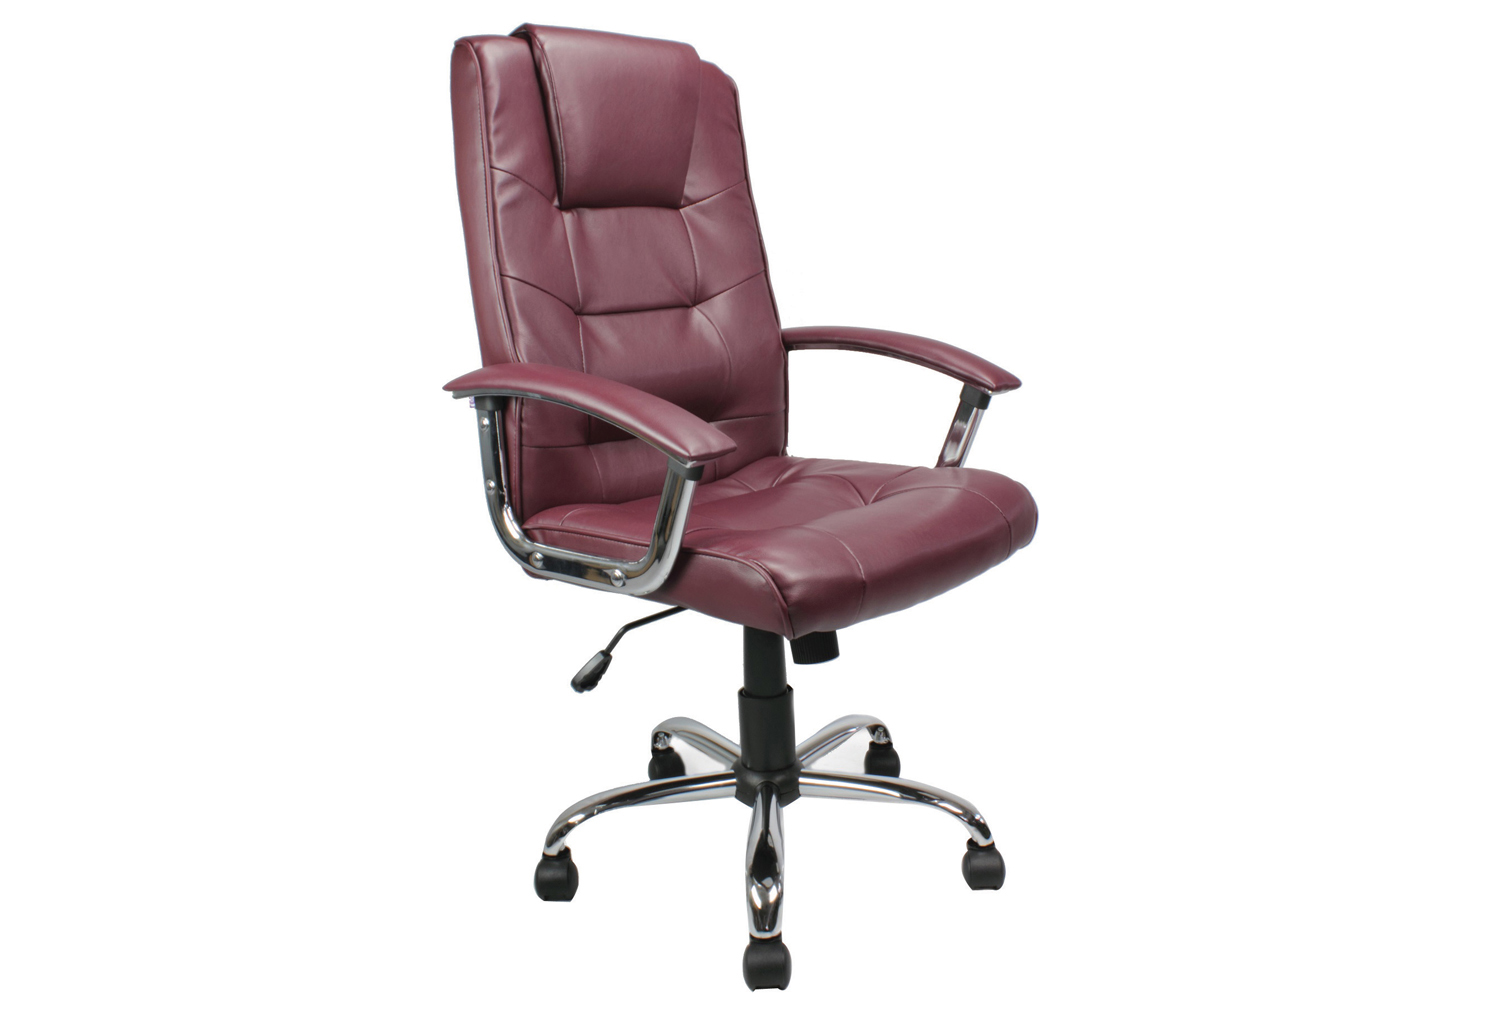 Skye High Back Burgundy Leather Faced Executive Office Chair, Burgundy, Express Delivery